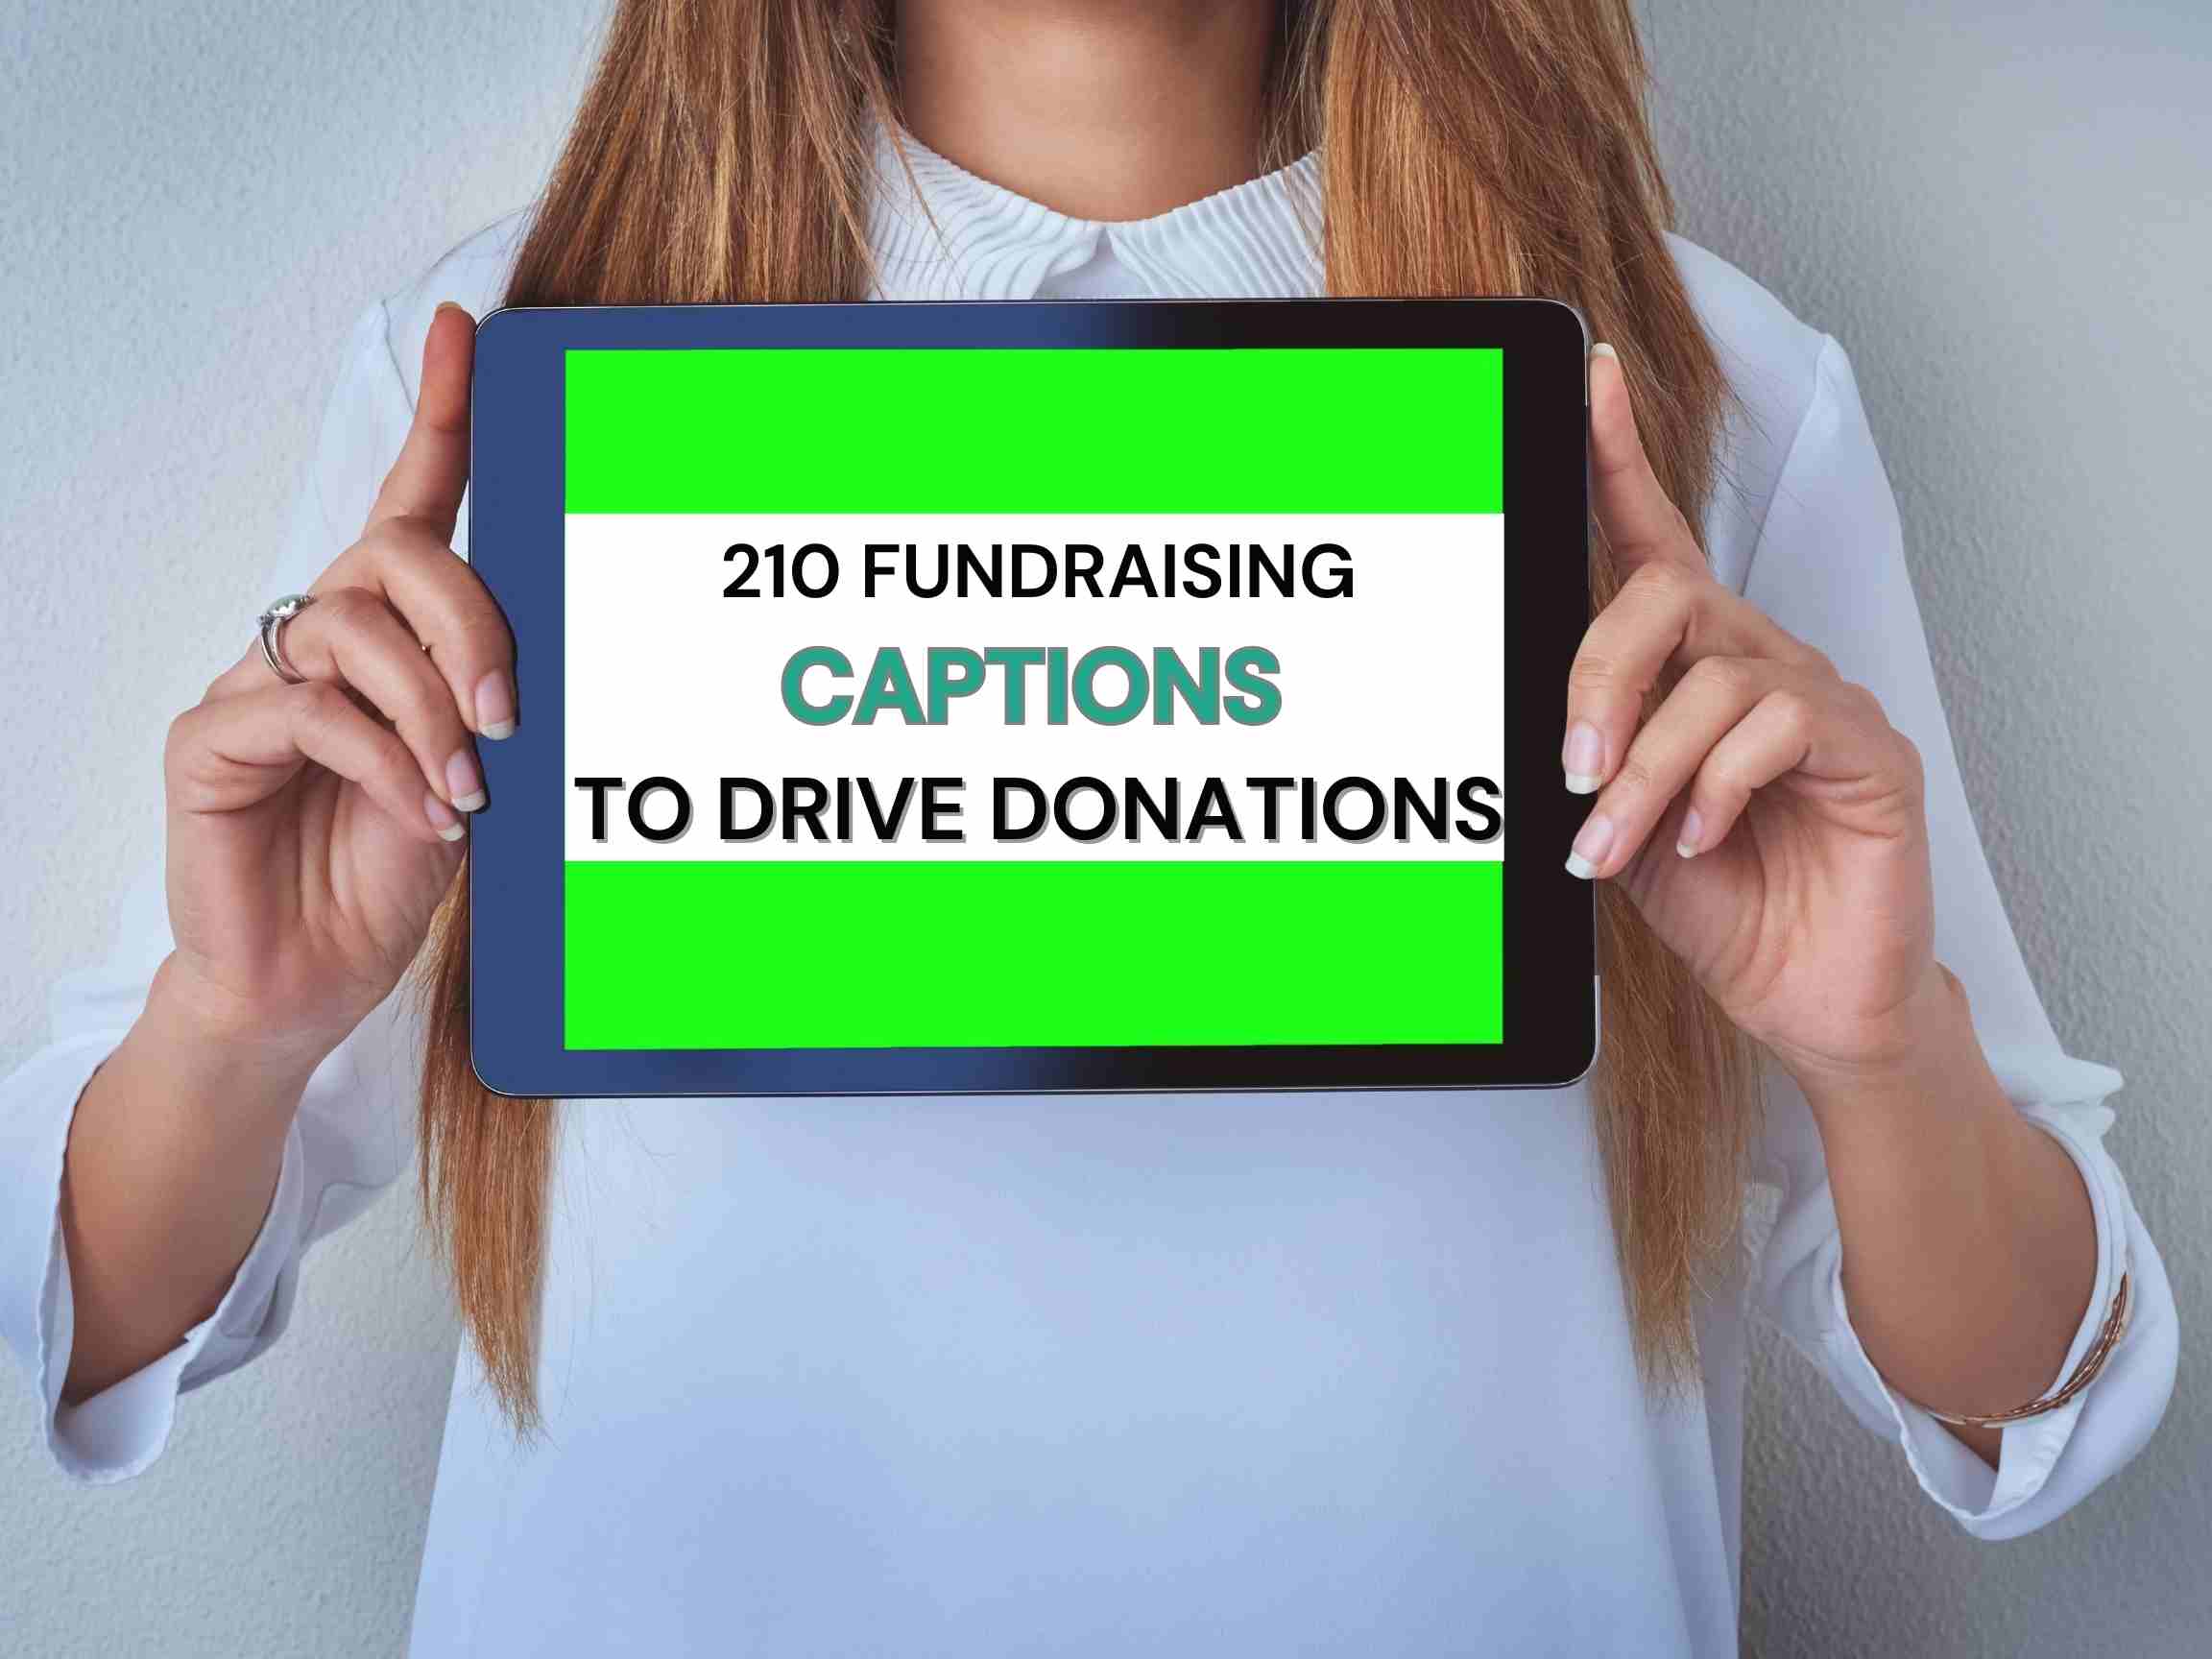 210 fundraising captions to drive donations